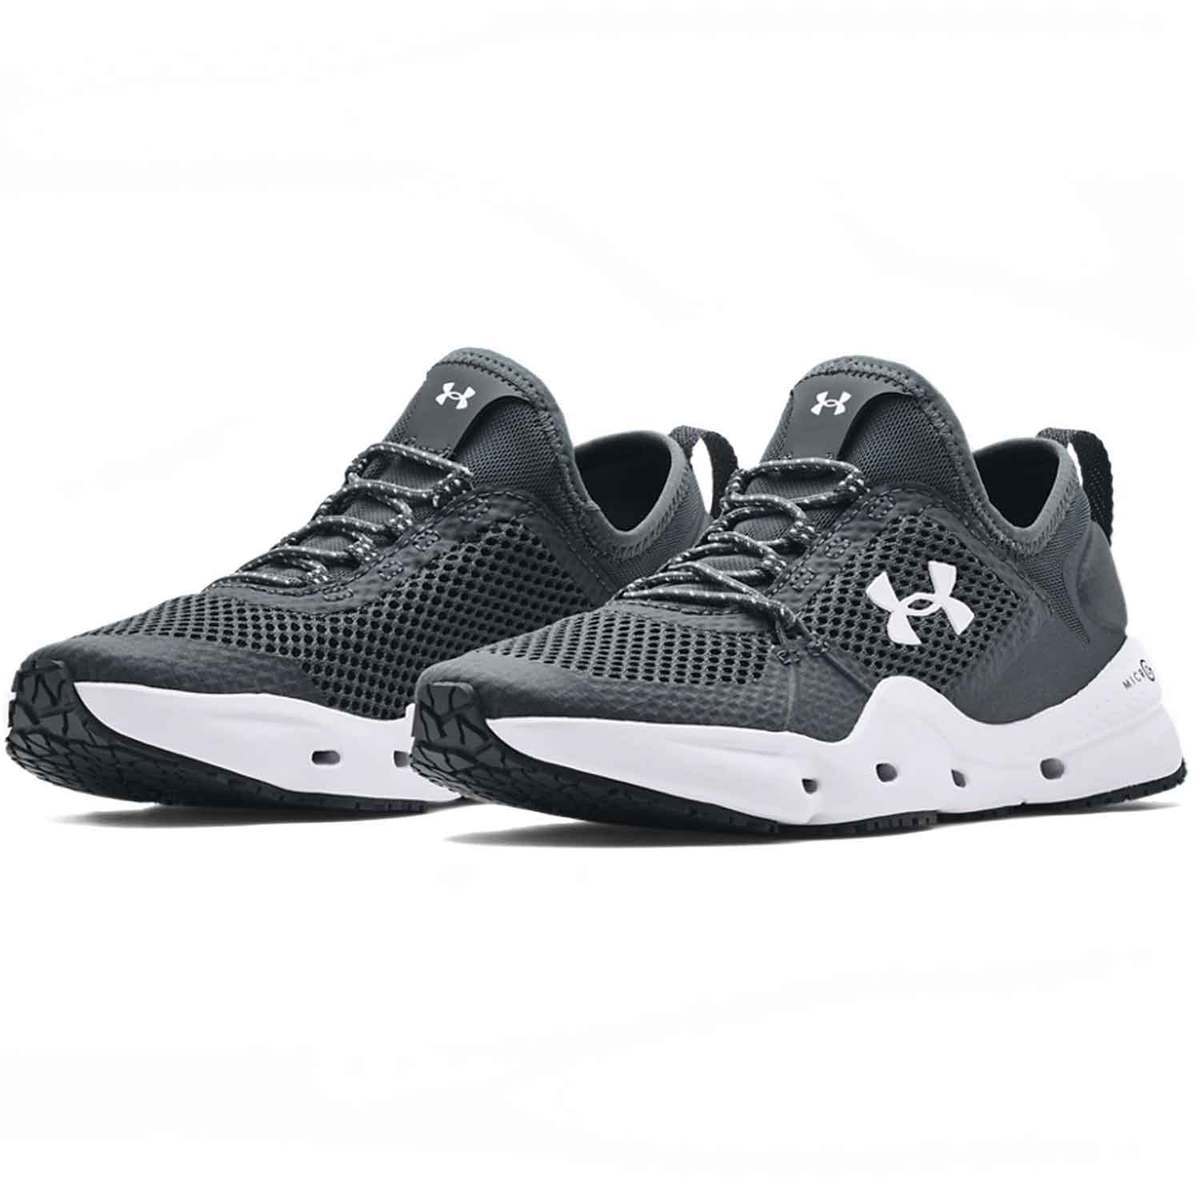 Under Armour Women's Micro G Kilchis Fishing Shoes - Pitch Gray - Size ...